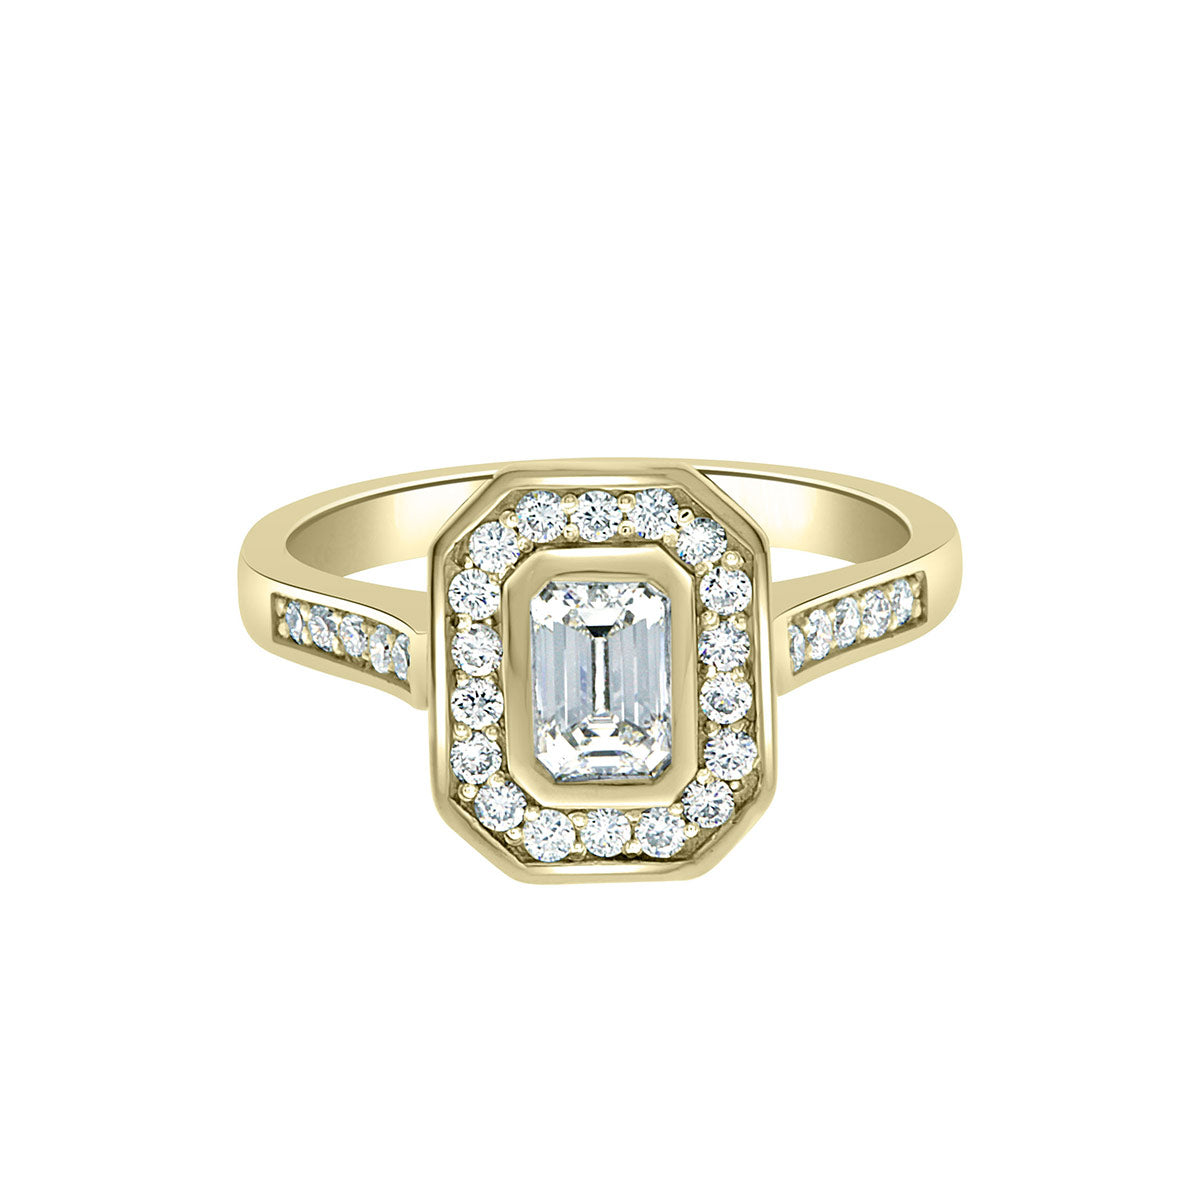 Emerald Cut Halo Ring in yellow gold